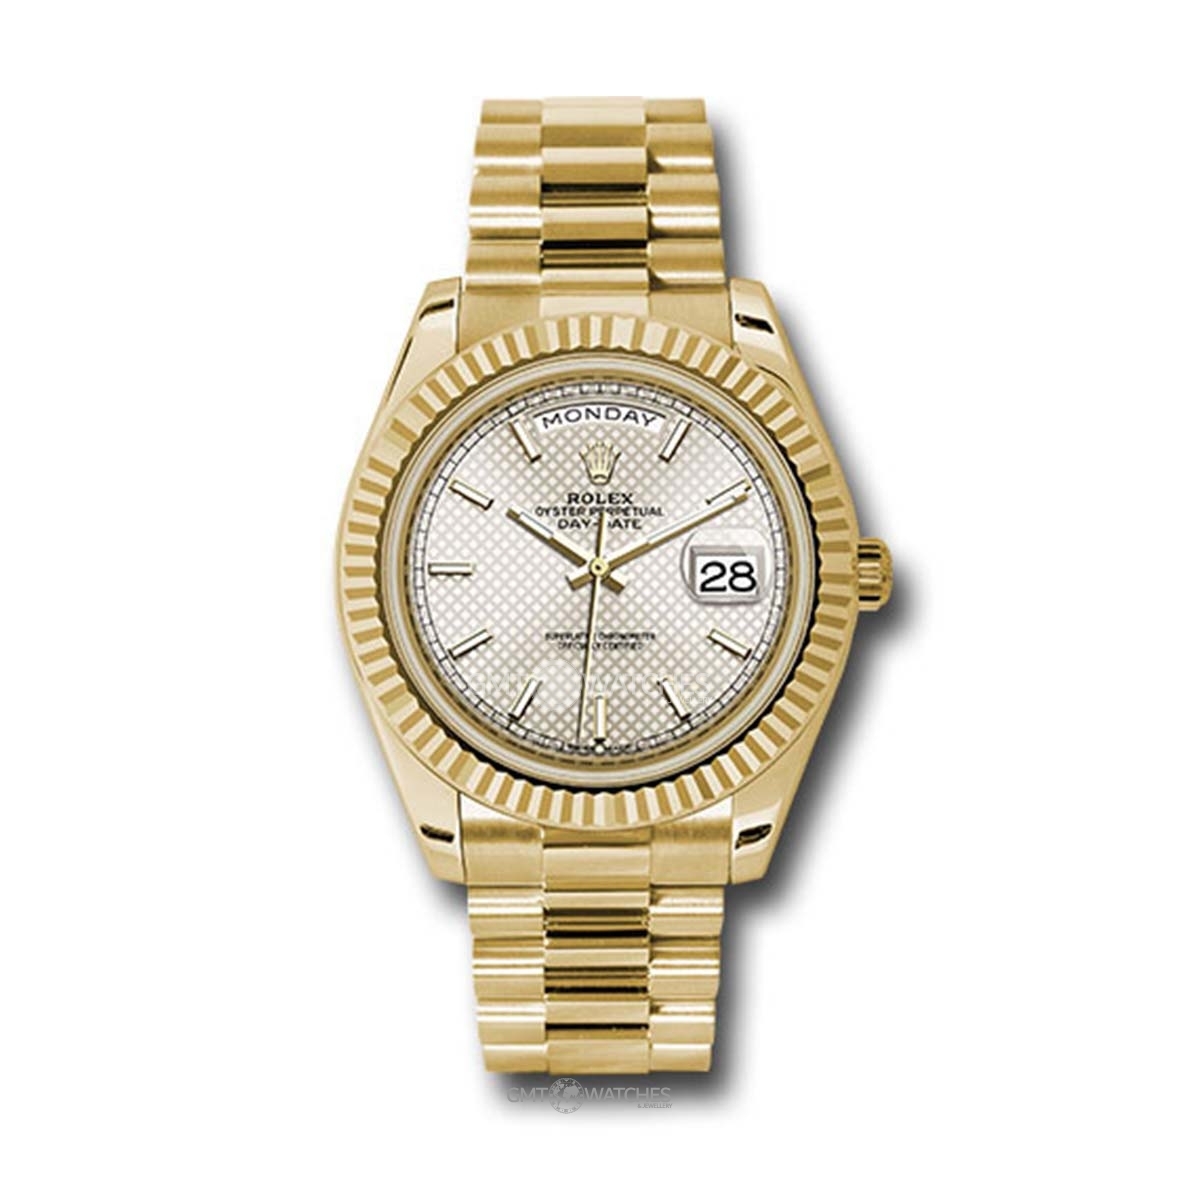 Rolex Oyster Perpetual Day-Date 40mm 18k Yellow Gold 228238 sdmip